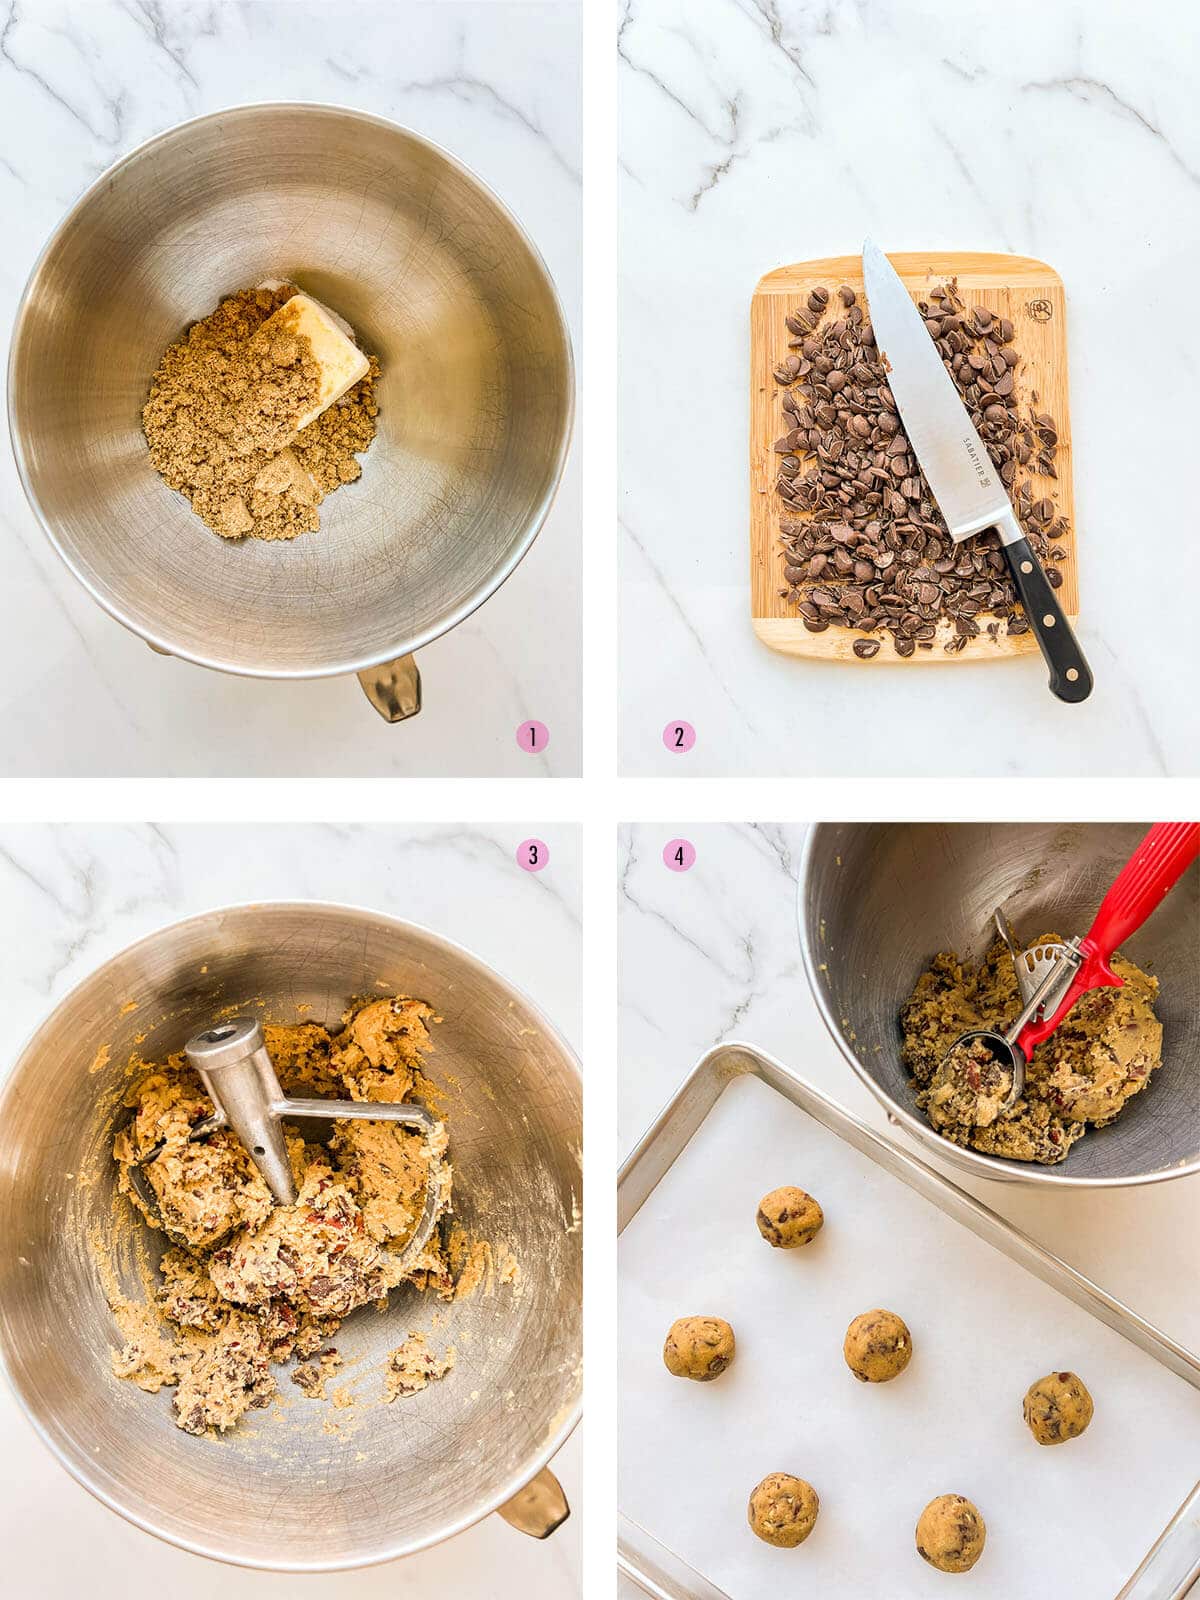 Collage of four images to show how to make chocolate chip cookies with pecans, including mixing the butter and sugars in the first image, chopping the chocolate in the second image, the raw cookie dough in the third image, and then scooping the dough with a disher onto a sheet pan in the fourth image.